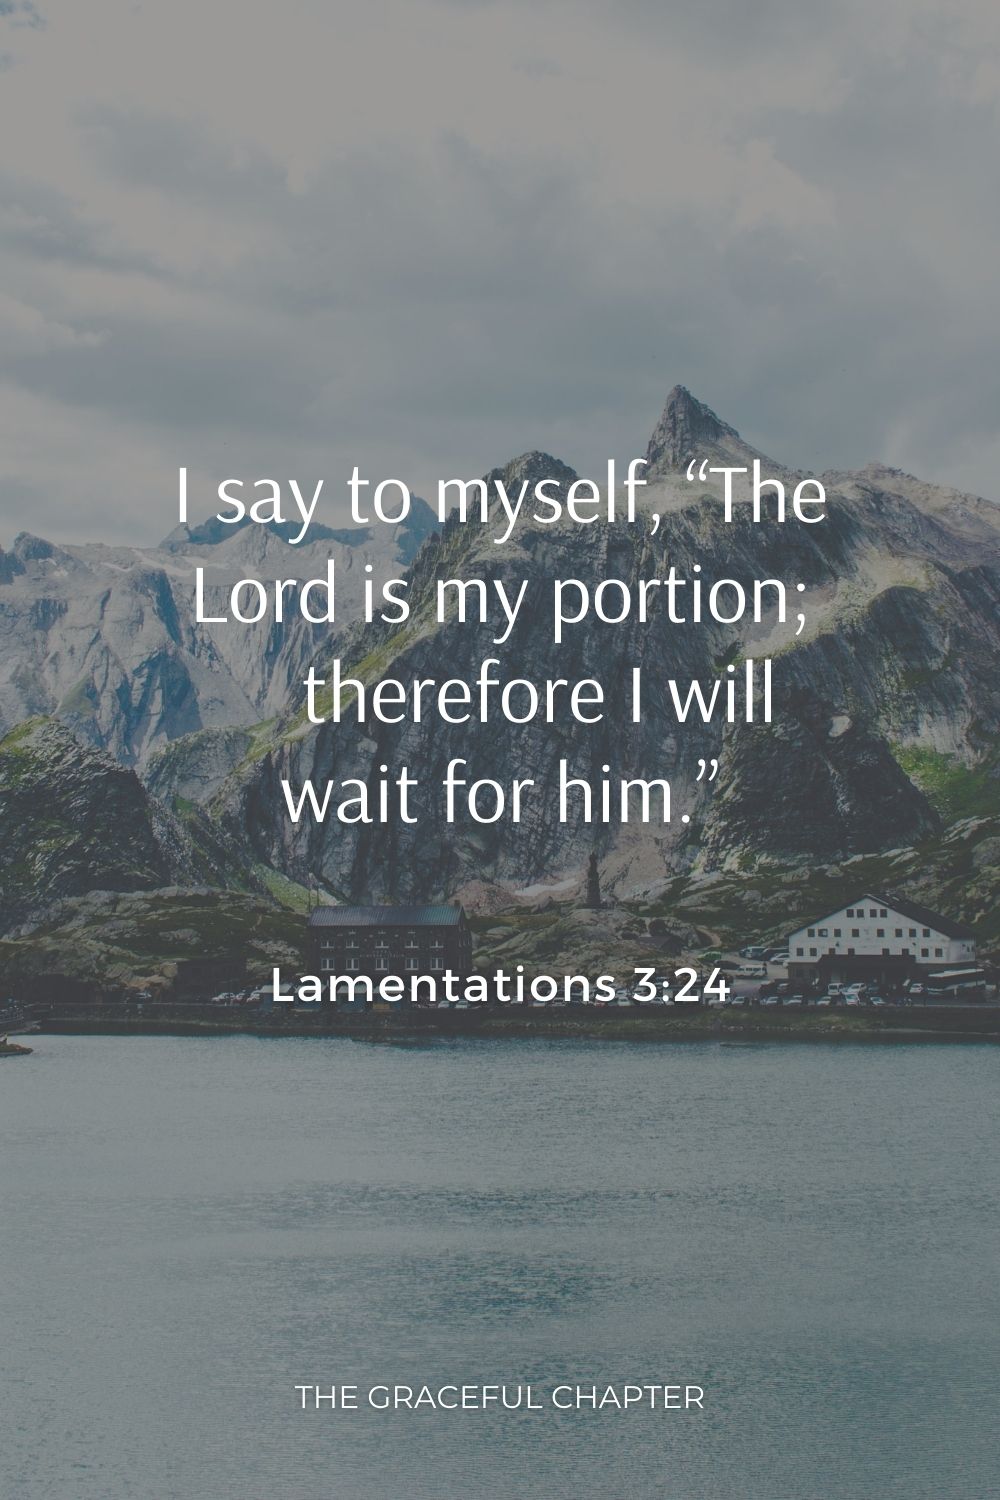 I say to myself, “The Lord is my portion;     therefore I will wait for him.” Lamentations 3:24